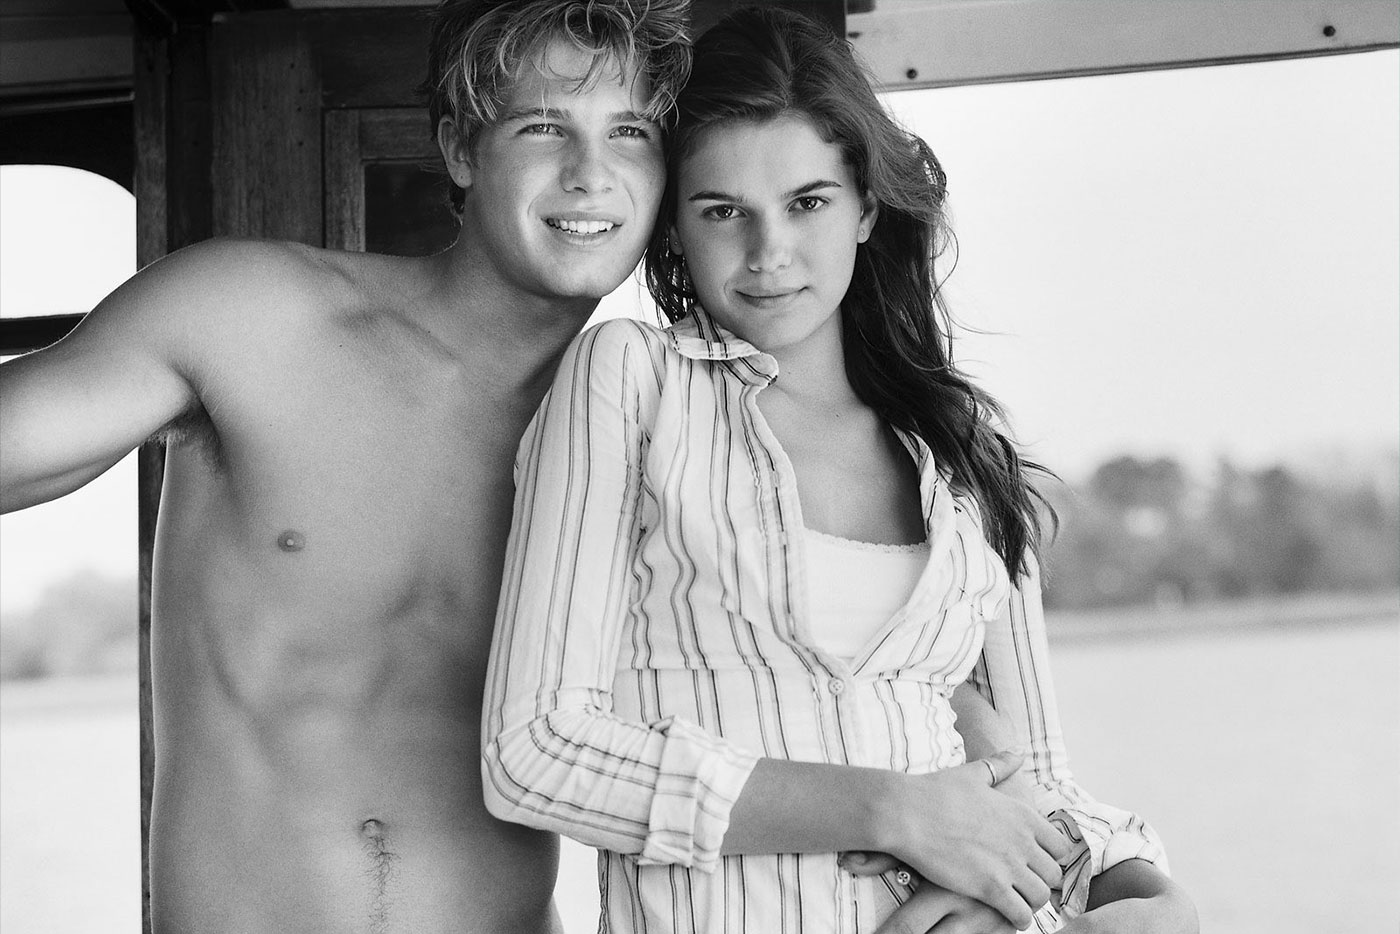 Abercrombie & Fitch's revival - From the Most Hated Retailer to America’s Top Triumph